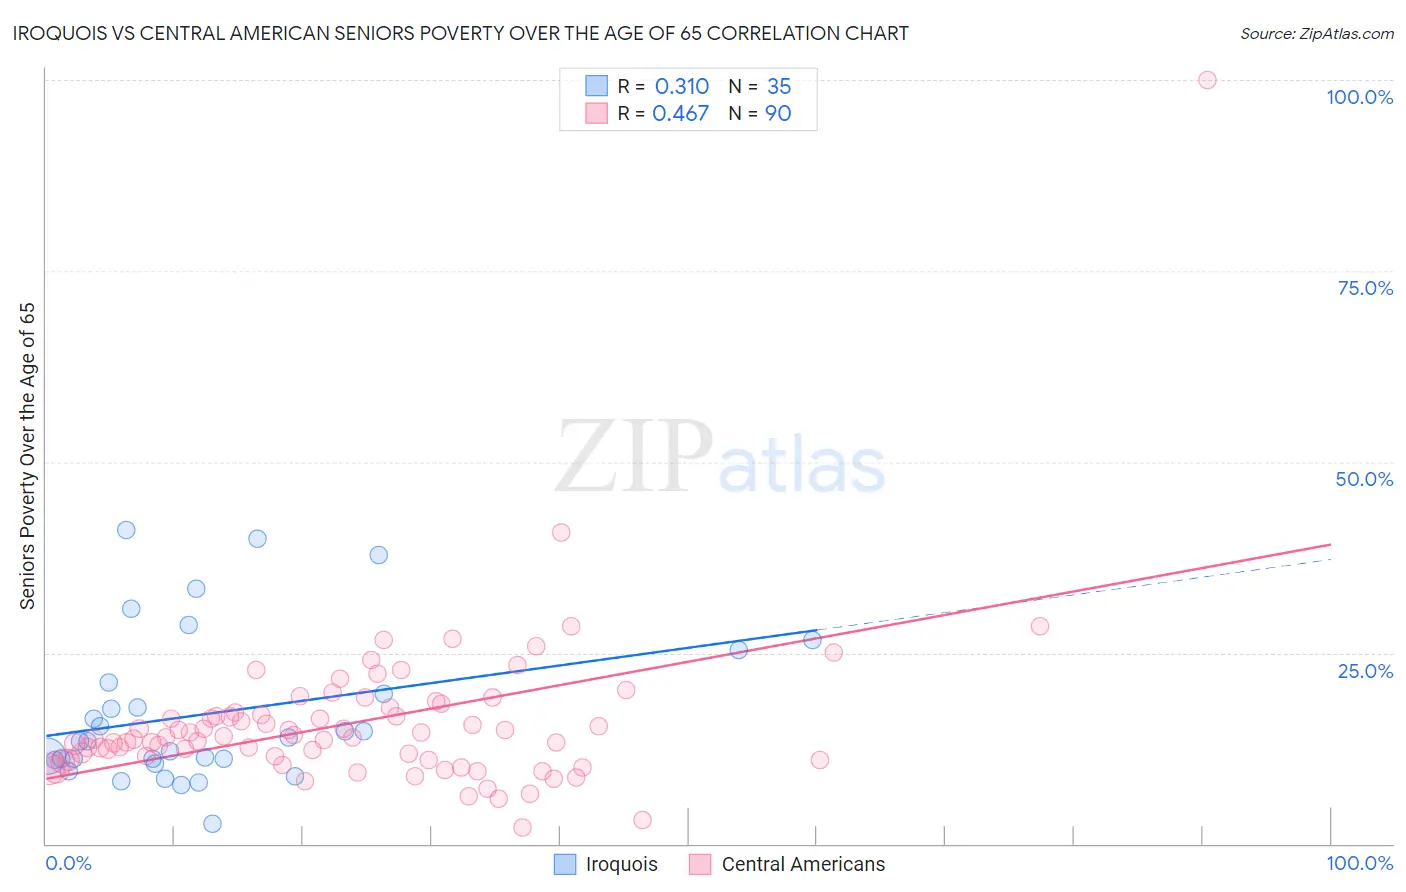 Iroquois vs Central American Seniors Poverty Over the Age of 65